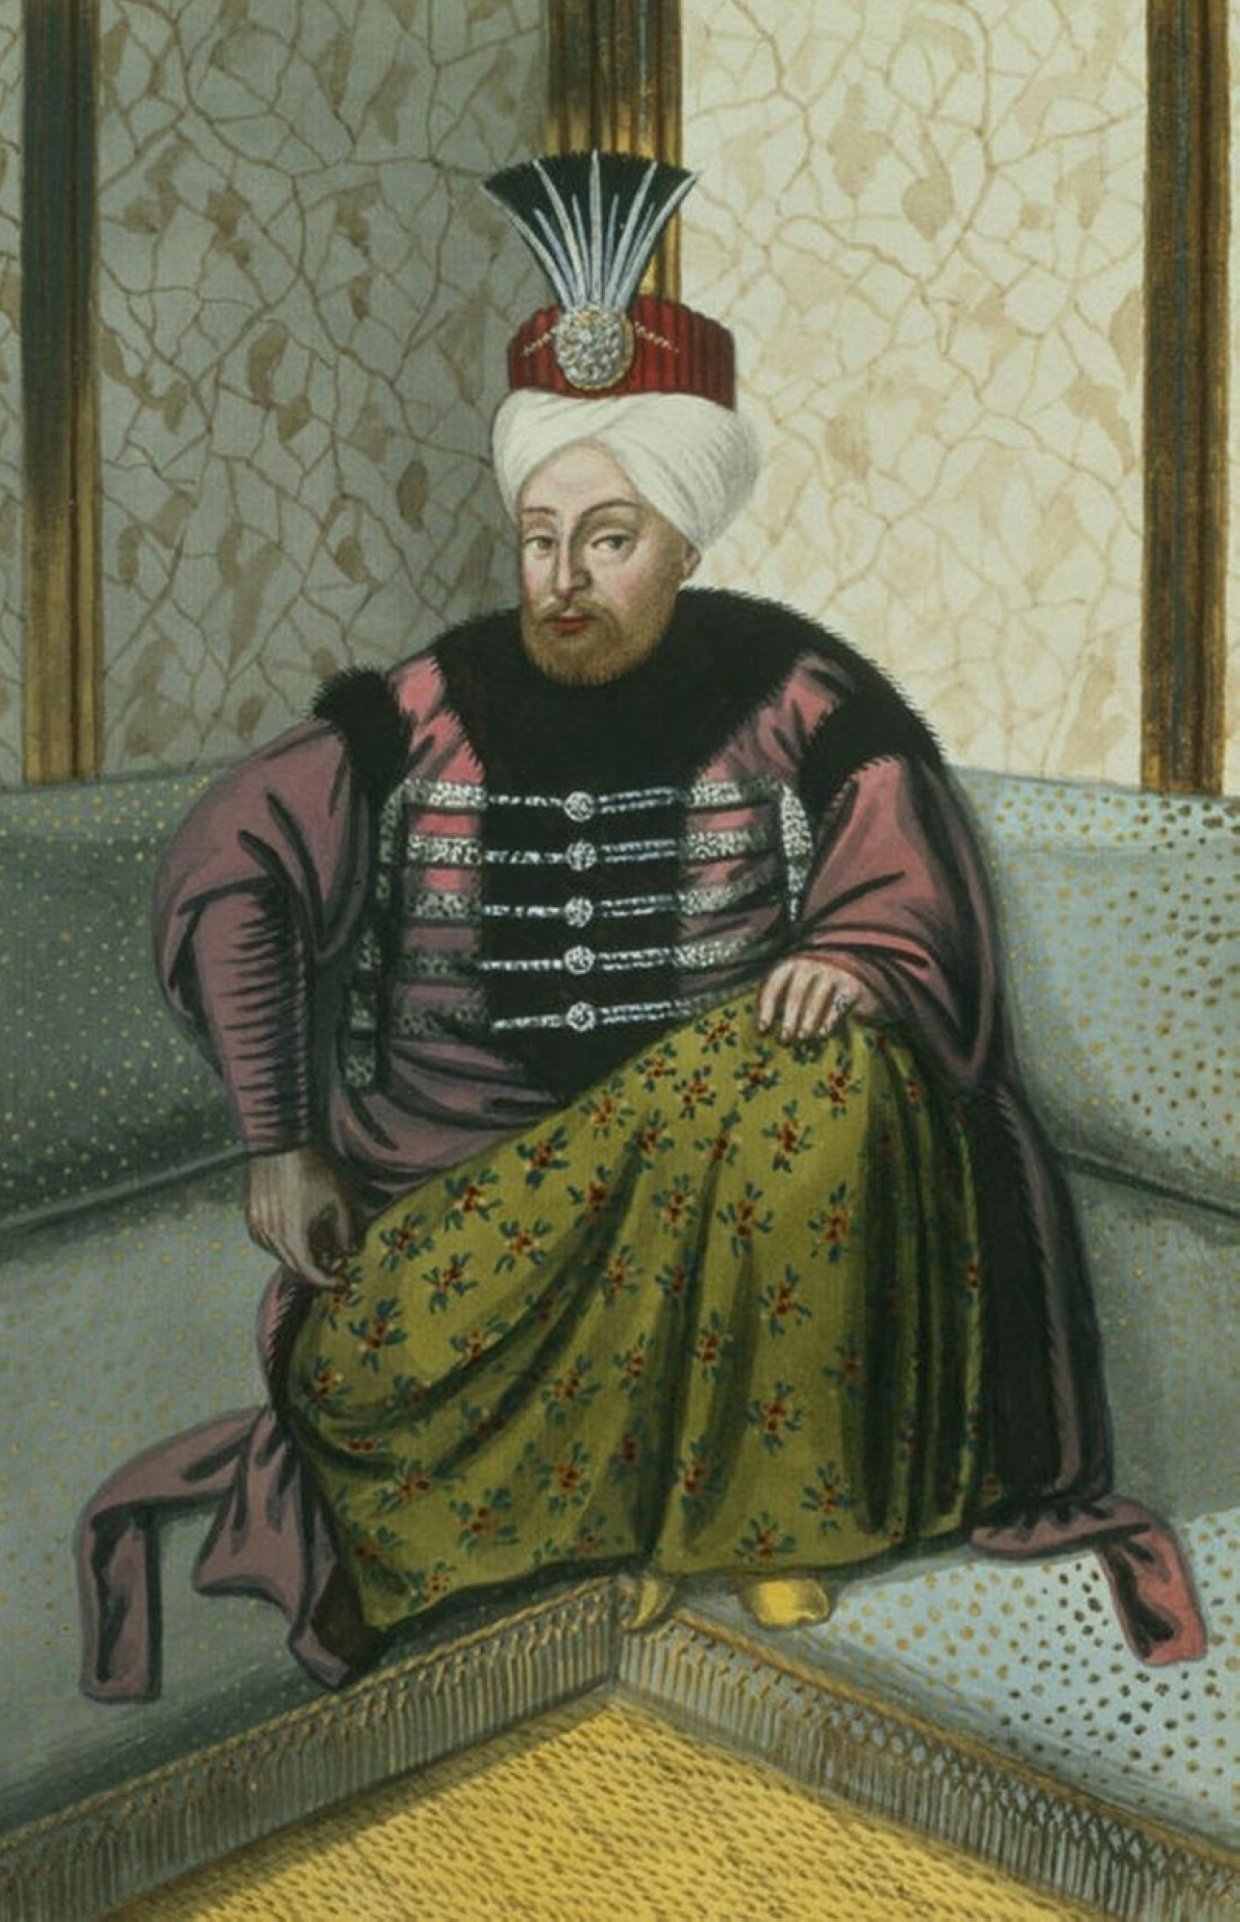 A portrait of Sultan Mehmed IV by John Young.